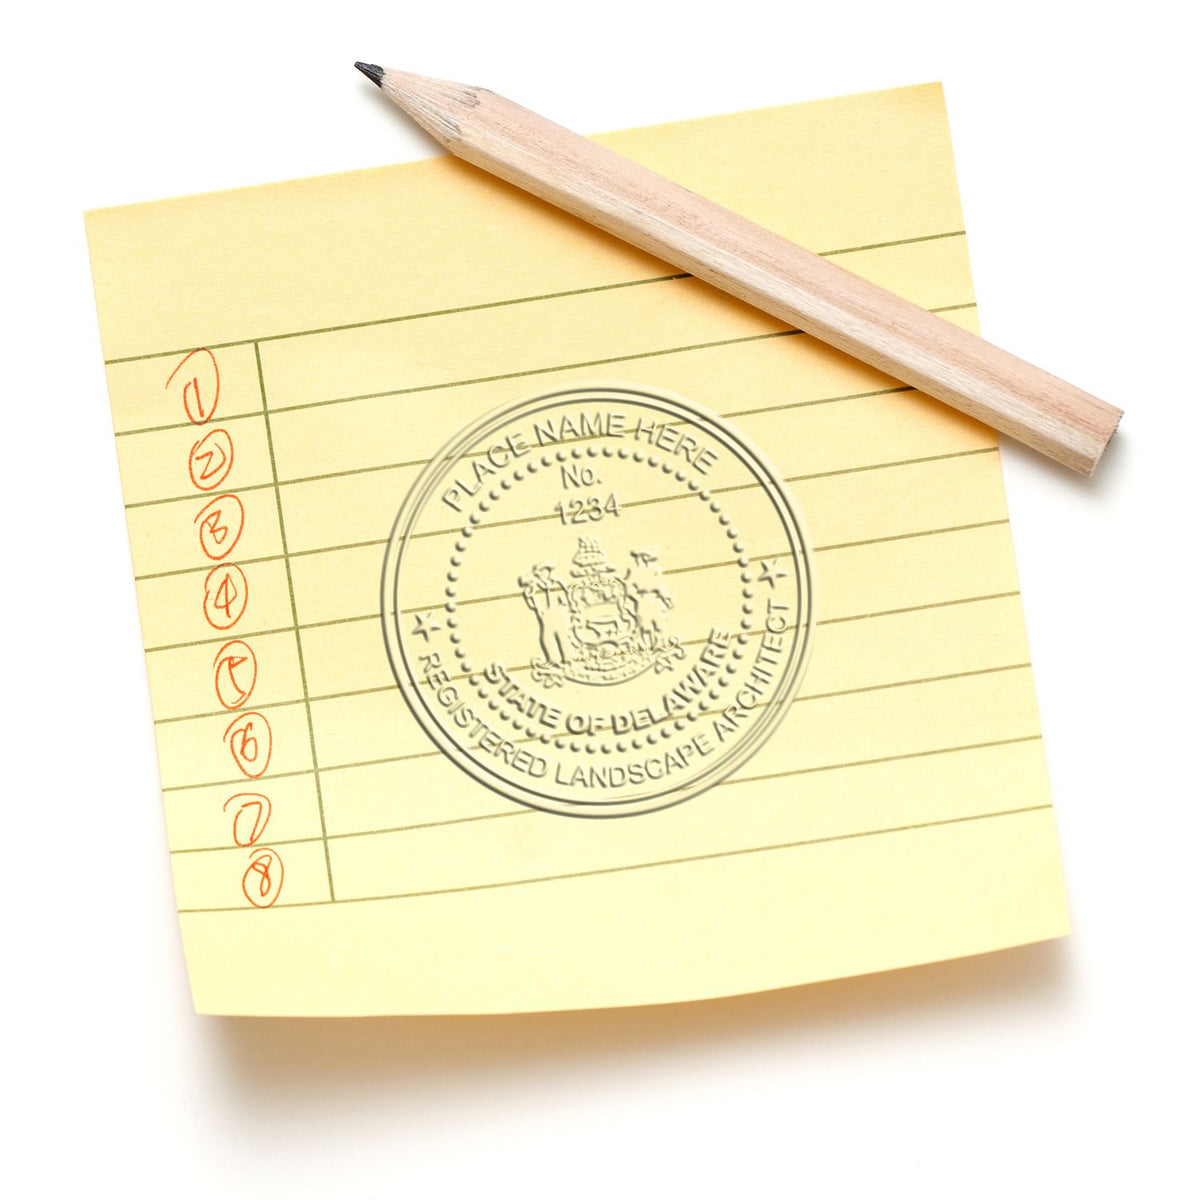 An alternative view of the Hybrid Delaware Landscape Architect Seal stamped on a sheet of paper showing the image in use